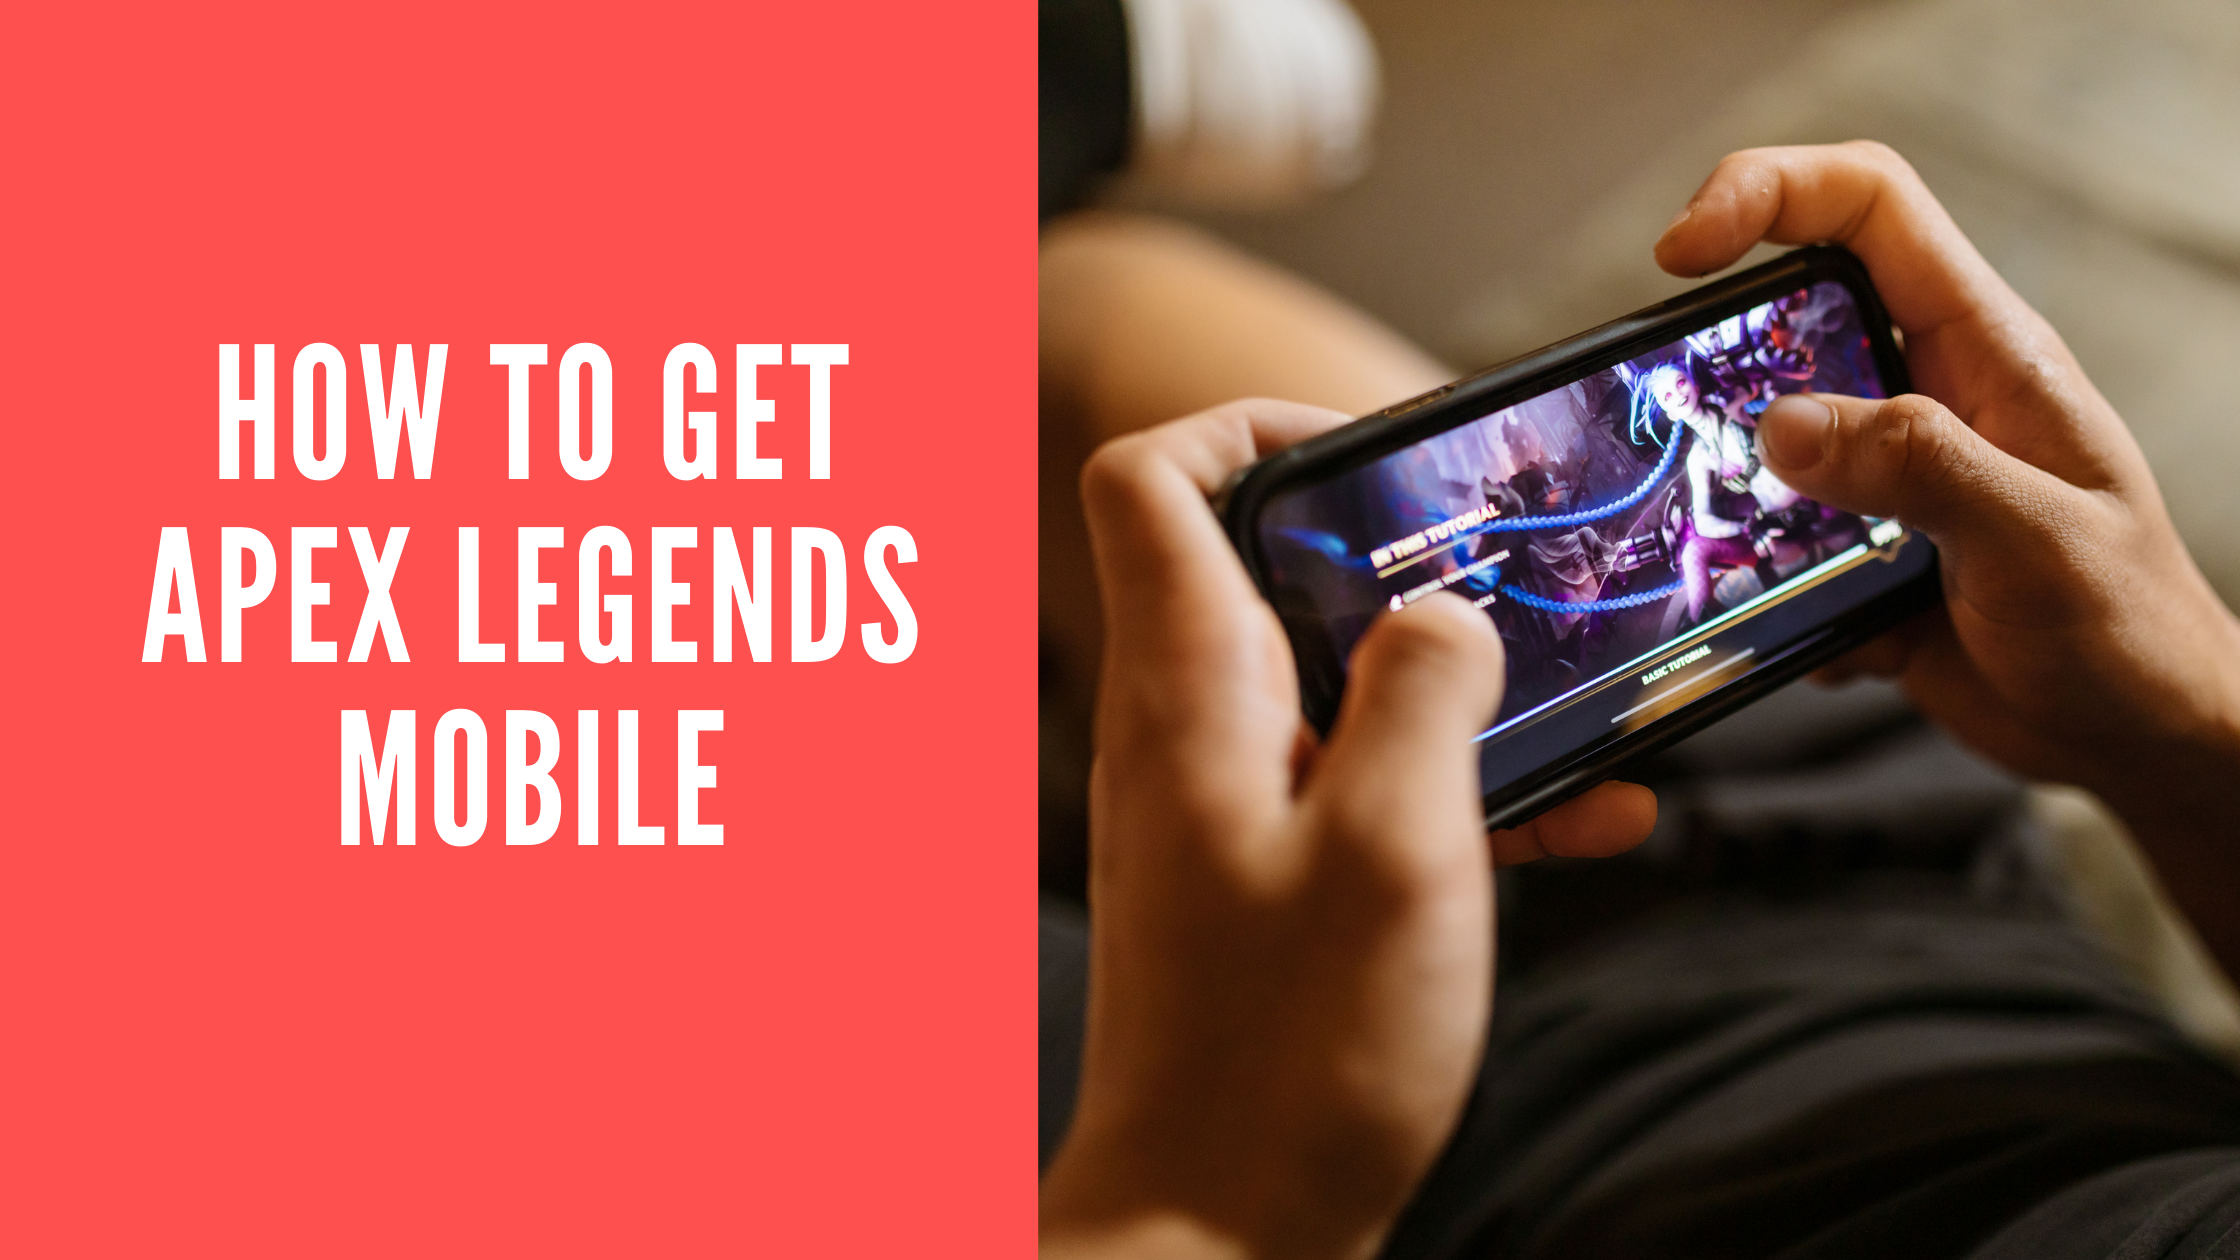 How To Get Apex Legends Mobile